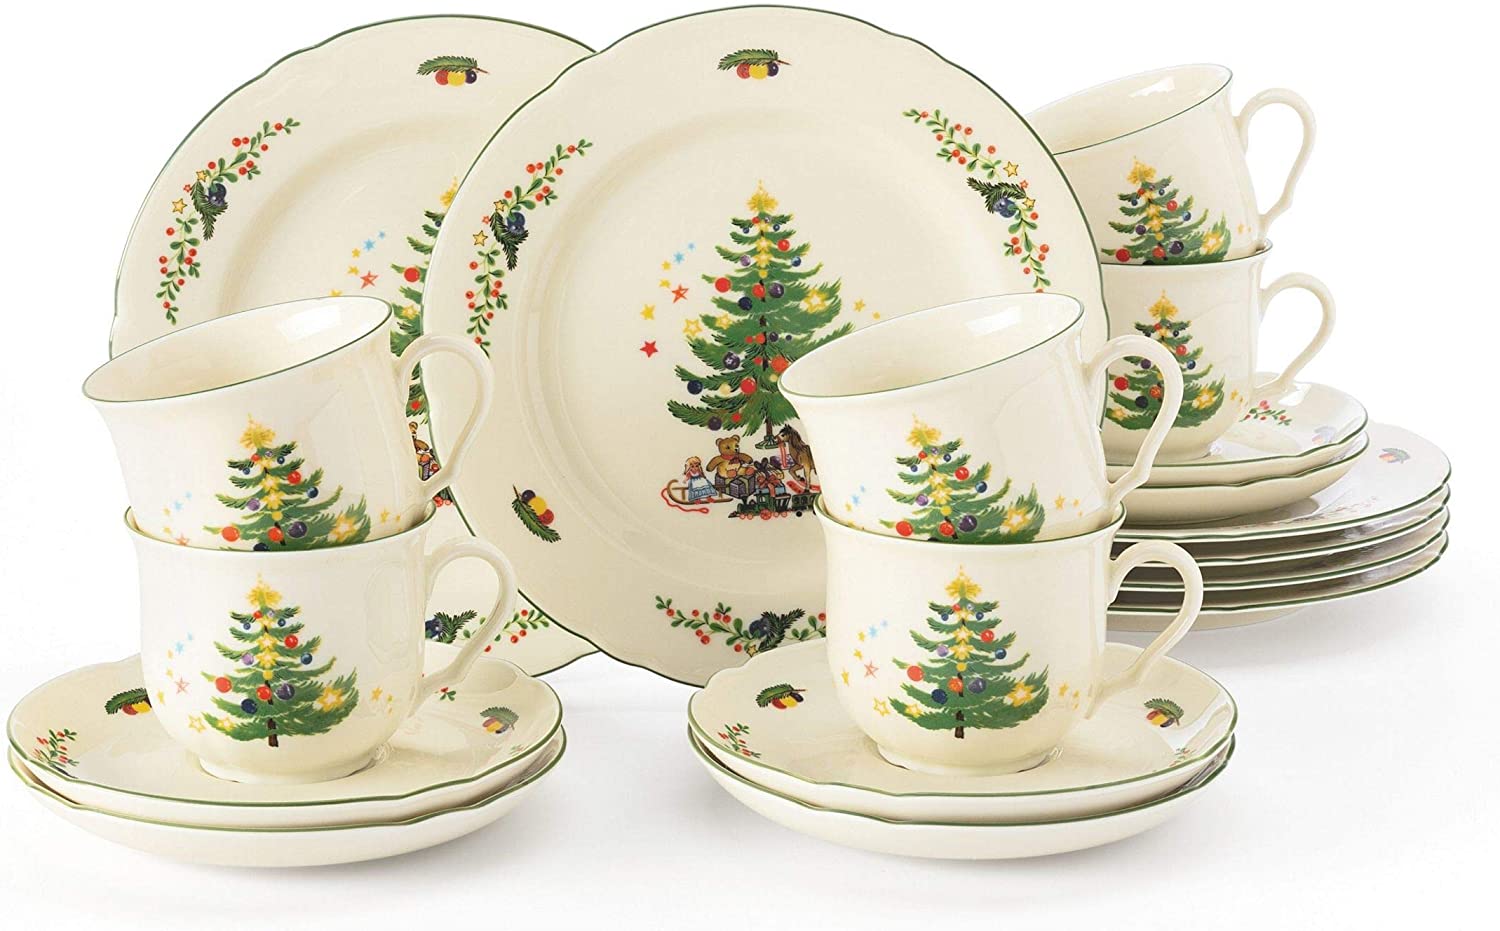 Seltmann Weiden 18-Piece Coffee Service Cream, Set for up to 6 People, Marieluise Series, Includes 6 Dinner Plates and Breakfast Plates, Hard Porcelain Green / Multi-Coloured